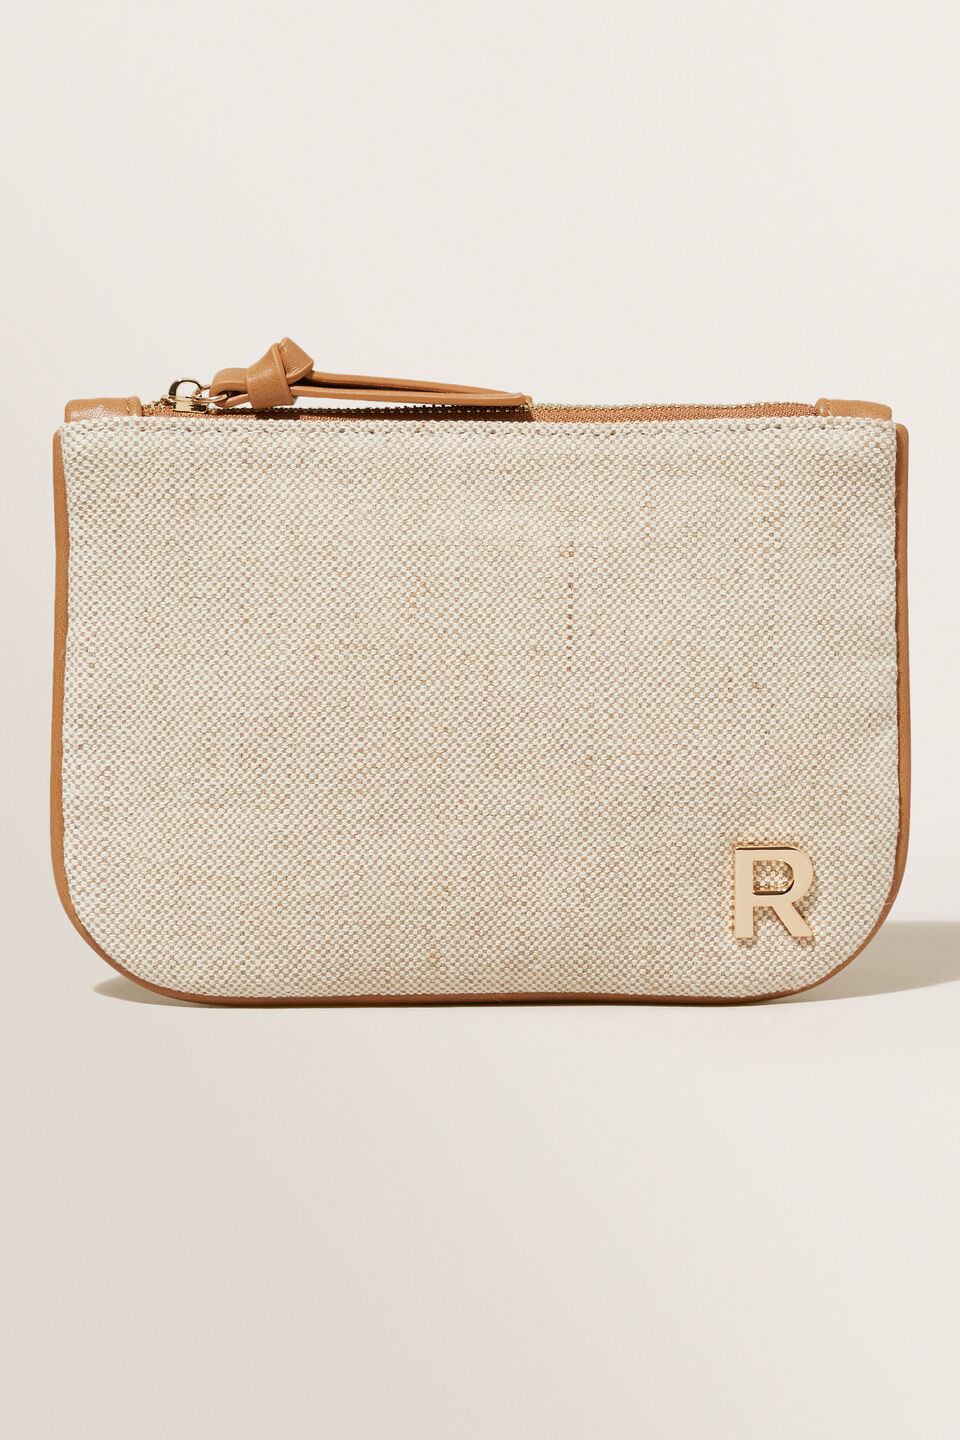 Initial Pouch  R